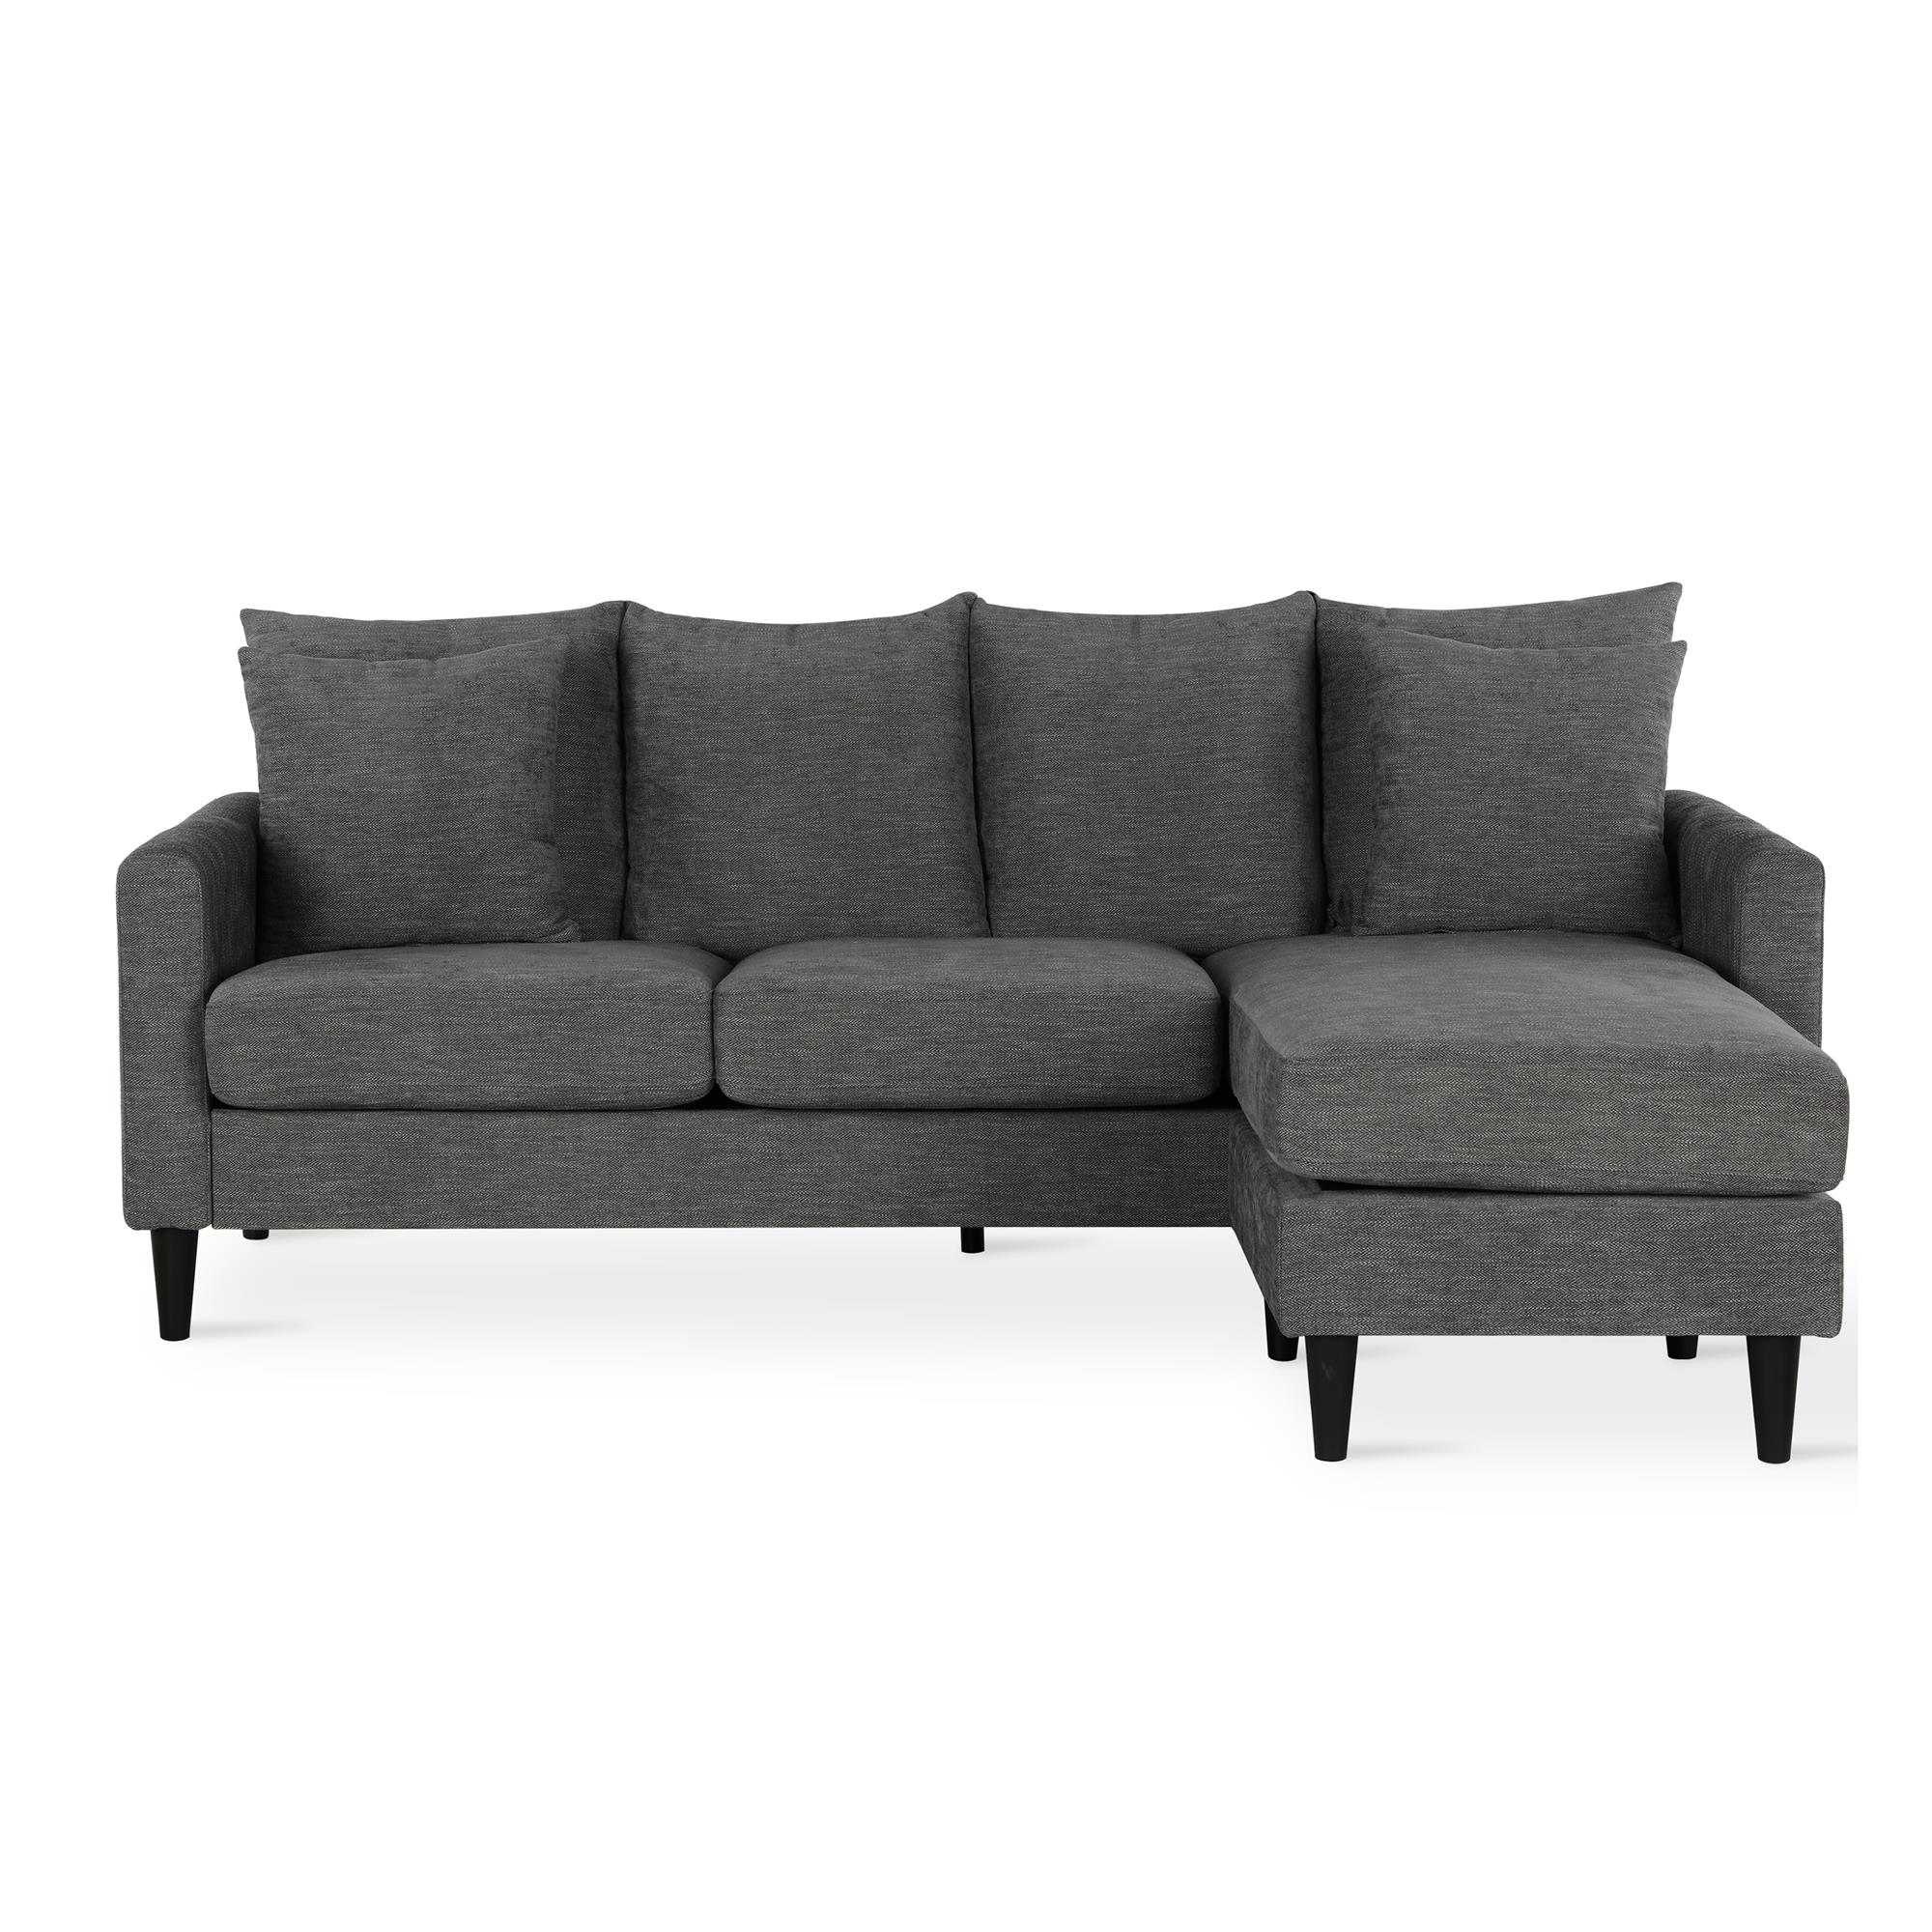 DHP Keaton Reversible Sectional with Pillows, Gray - image 5 of 14